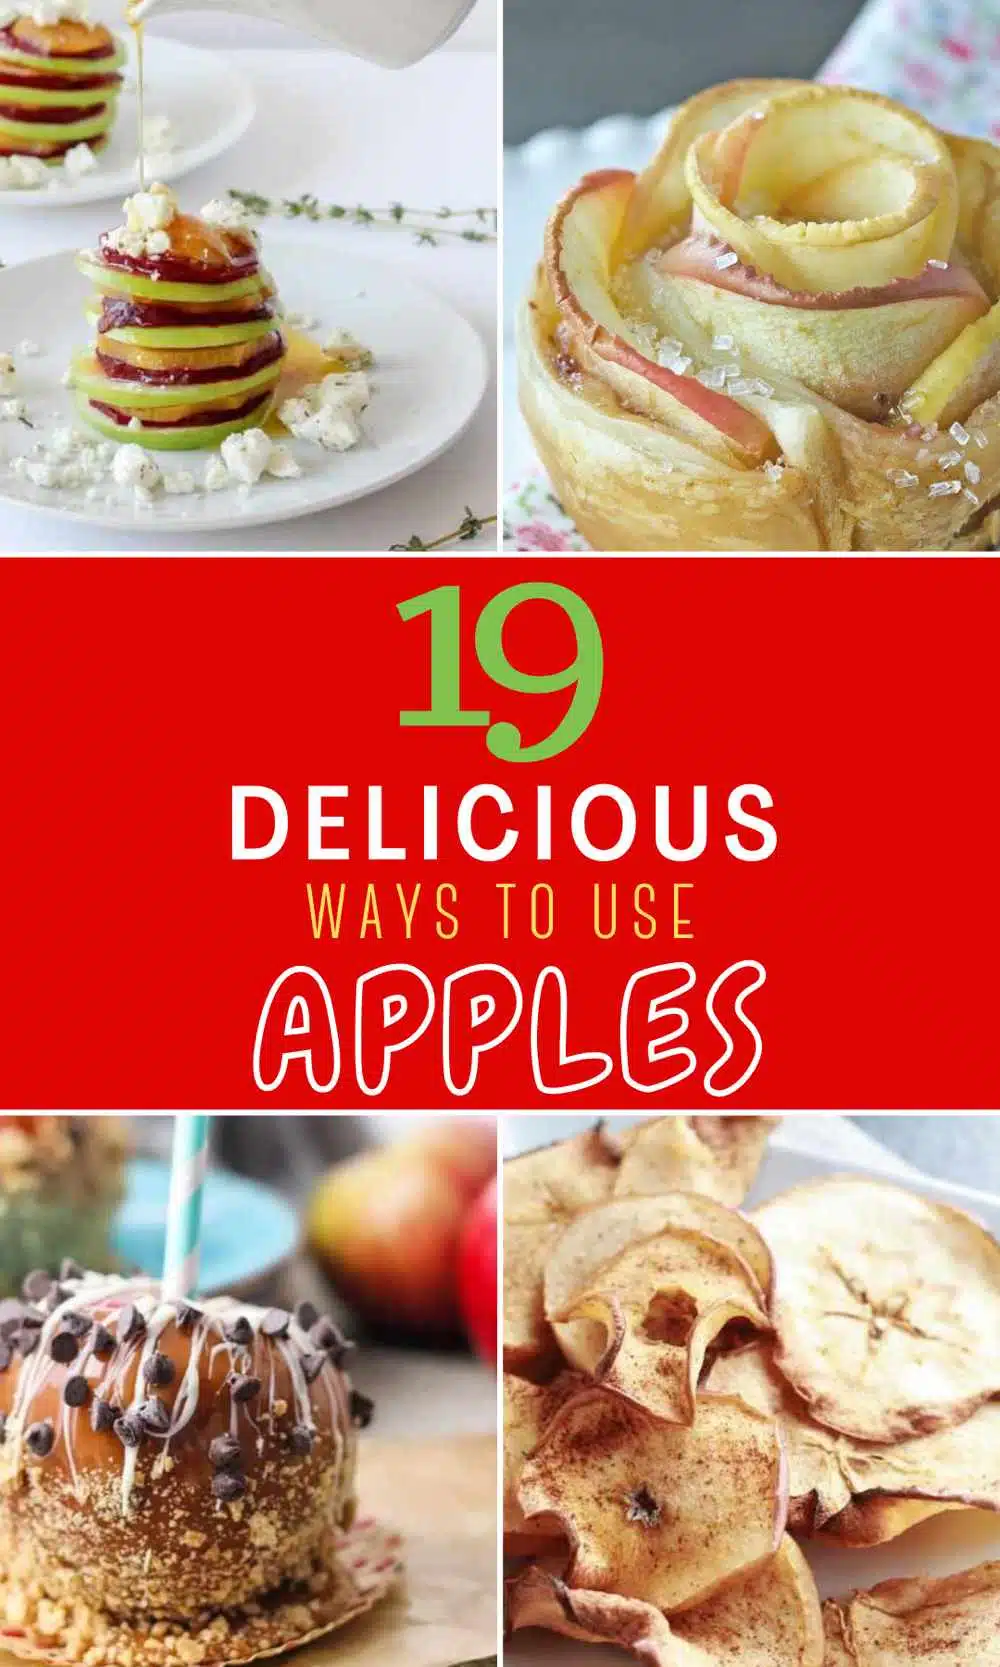 19 Delicious Ways To Use Apples collage image.